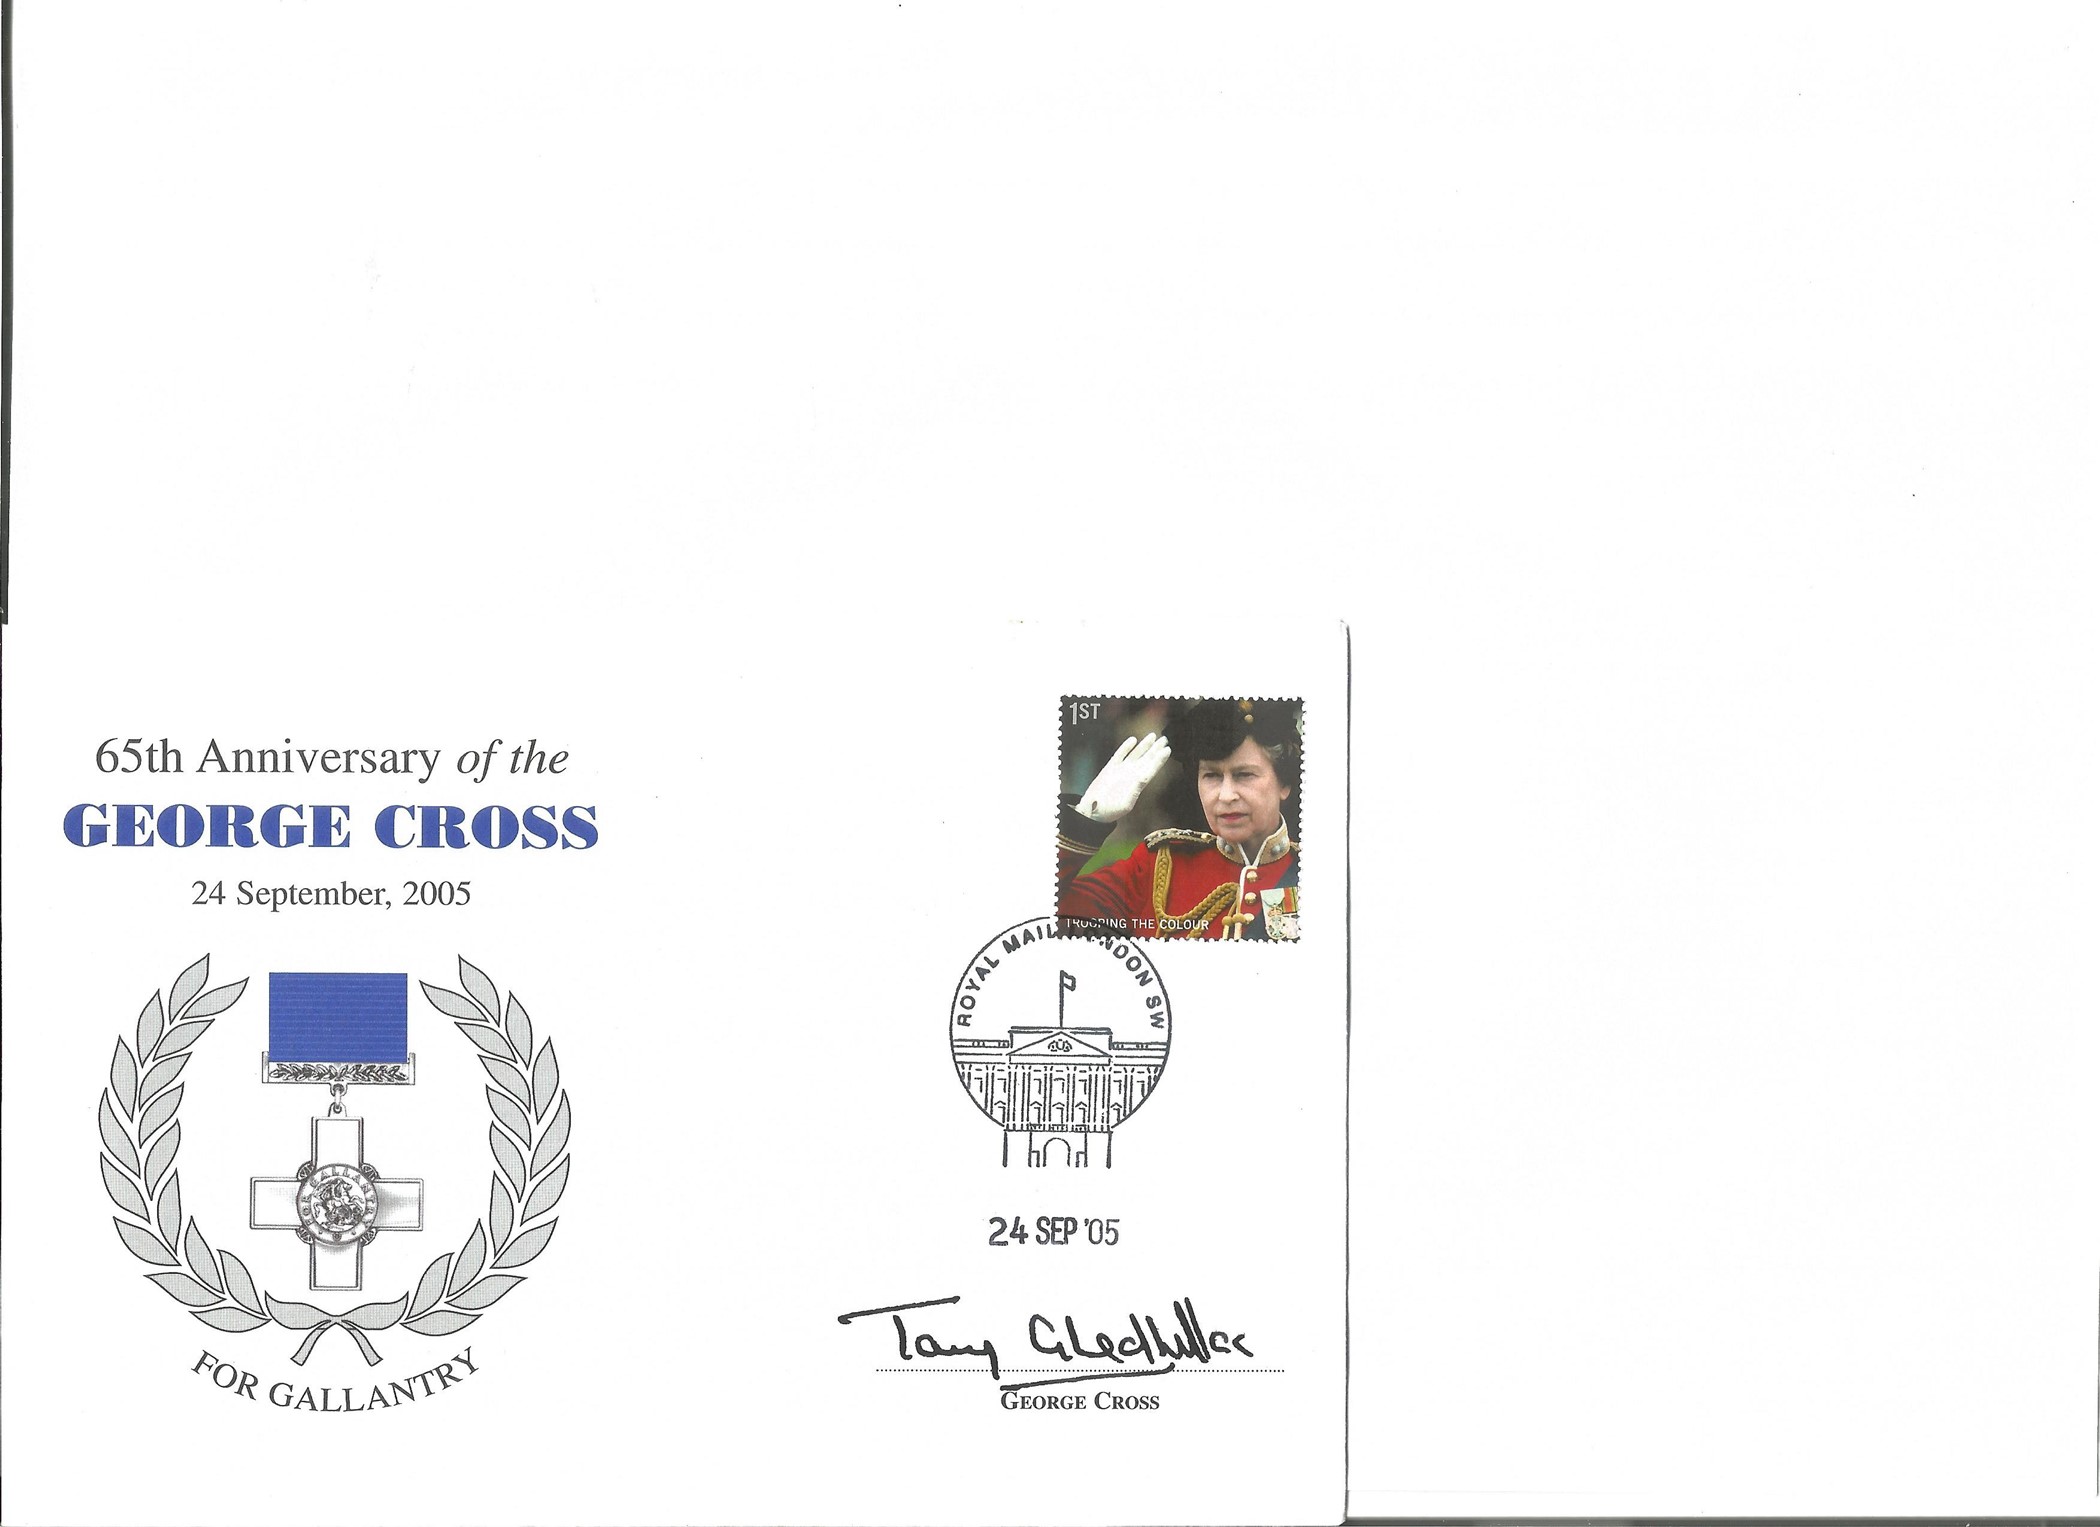 Tony Gledhill GC George Cross winner signed 2005 65th ann GC cover. Good condition. All autographs